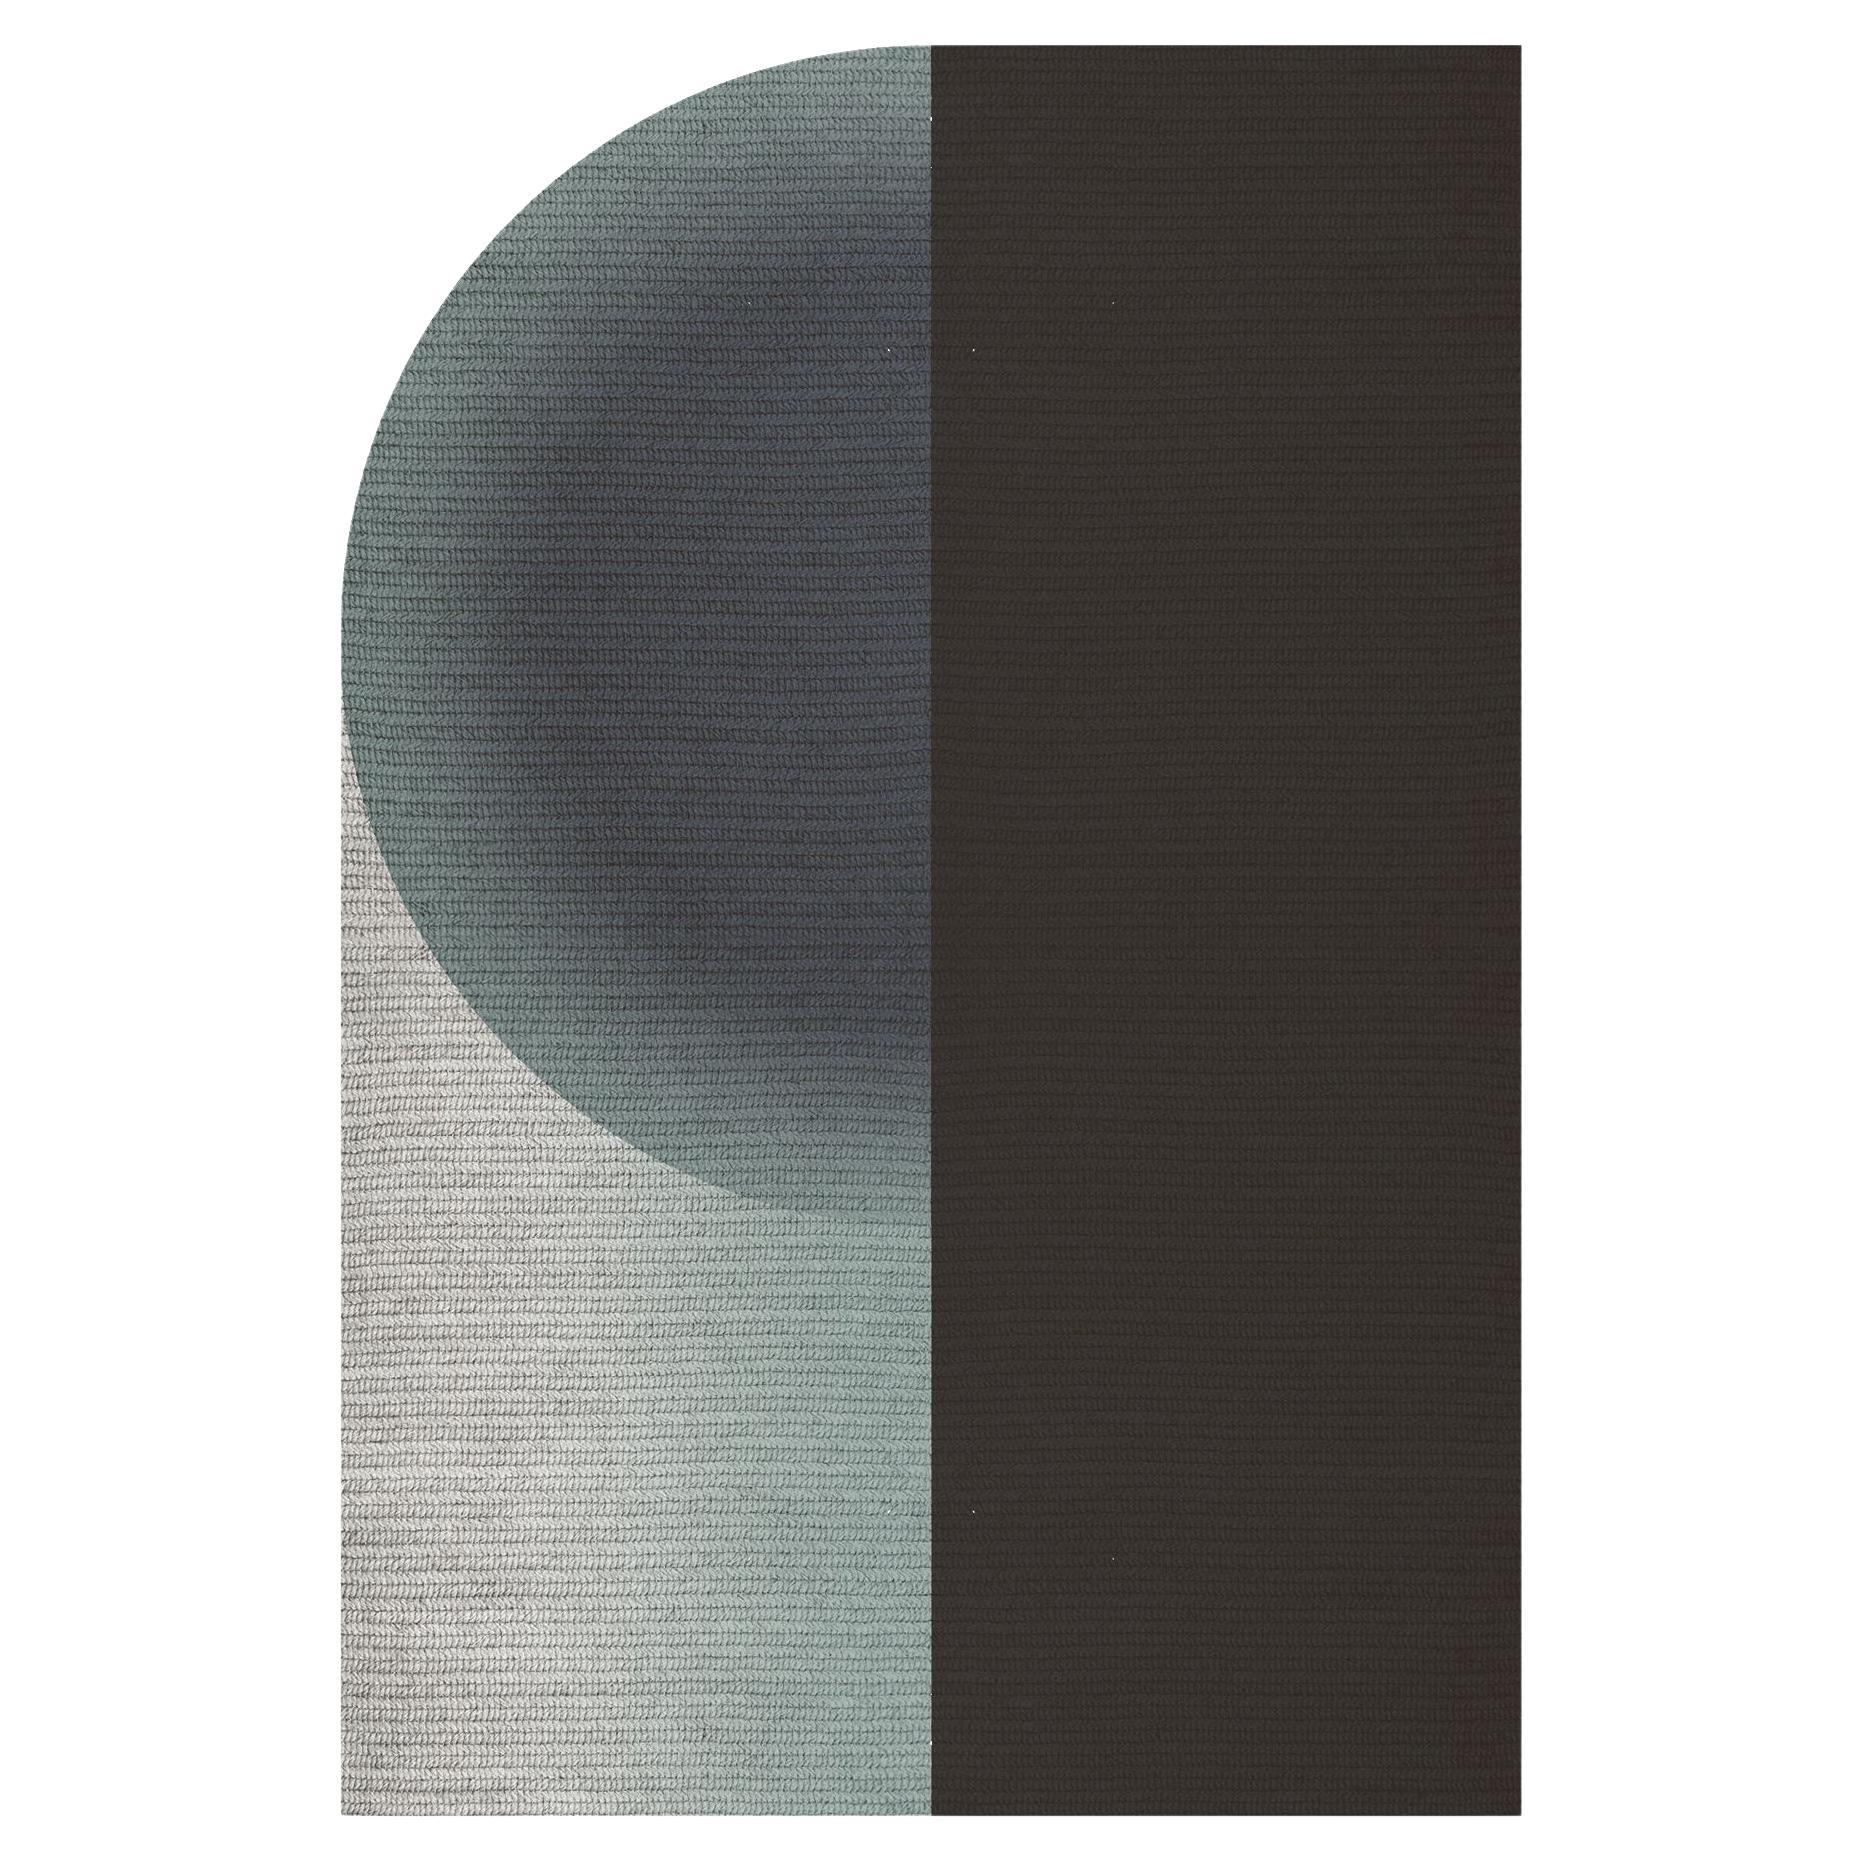 'Glow' Rug in Abaca, Colour 'Sterling' 160x240cm by Claire Vos for Musett Design